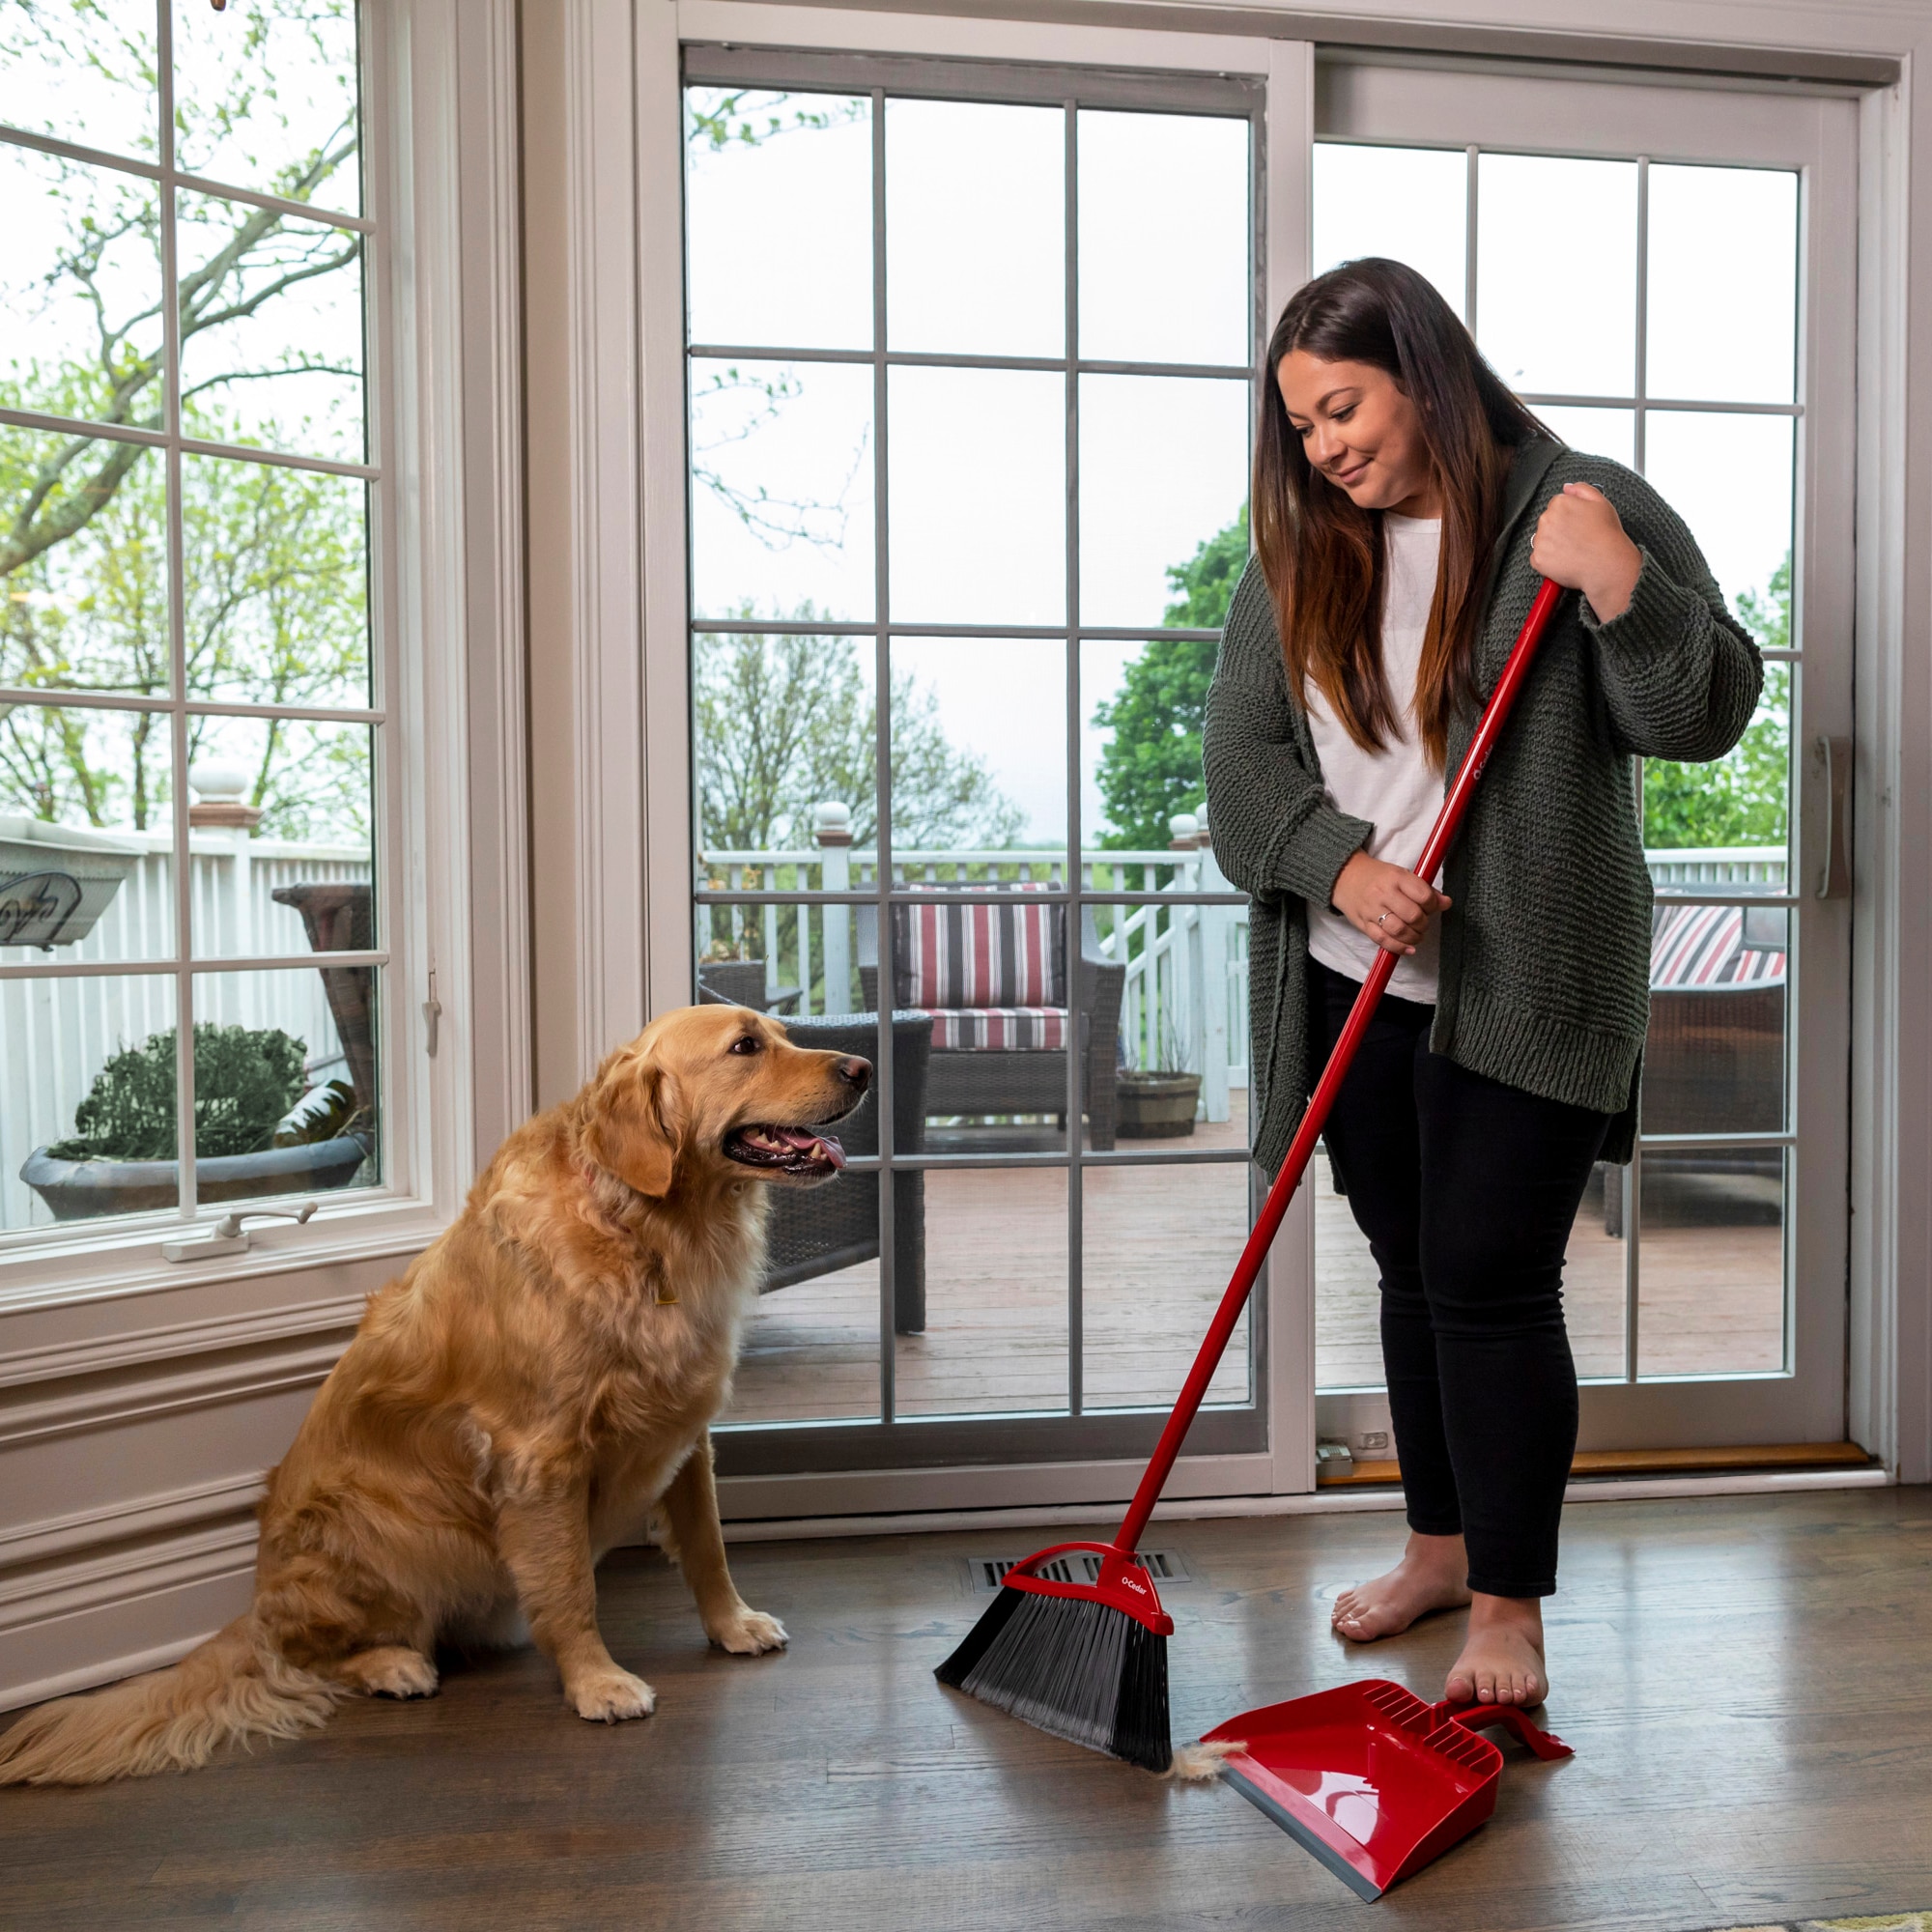 Pet Cleaning Tips, Household Cleaning Products Made for Easy Cleaning